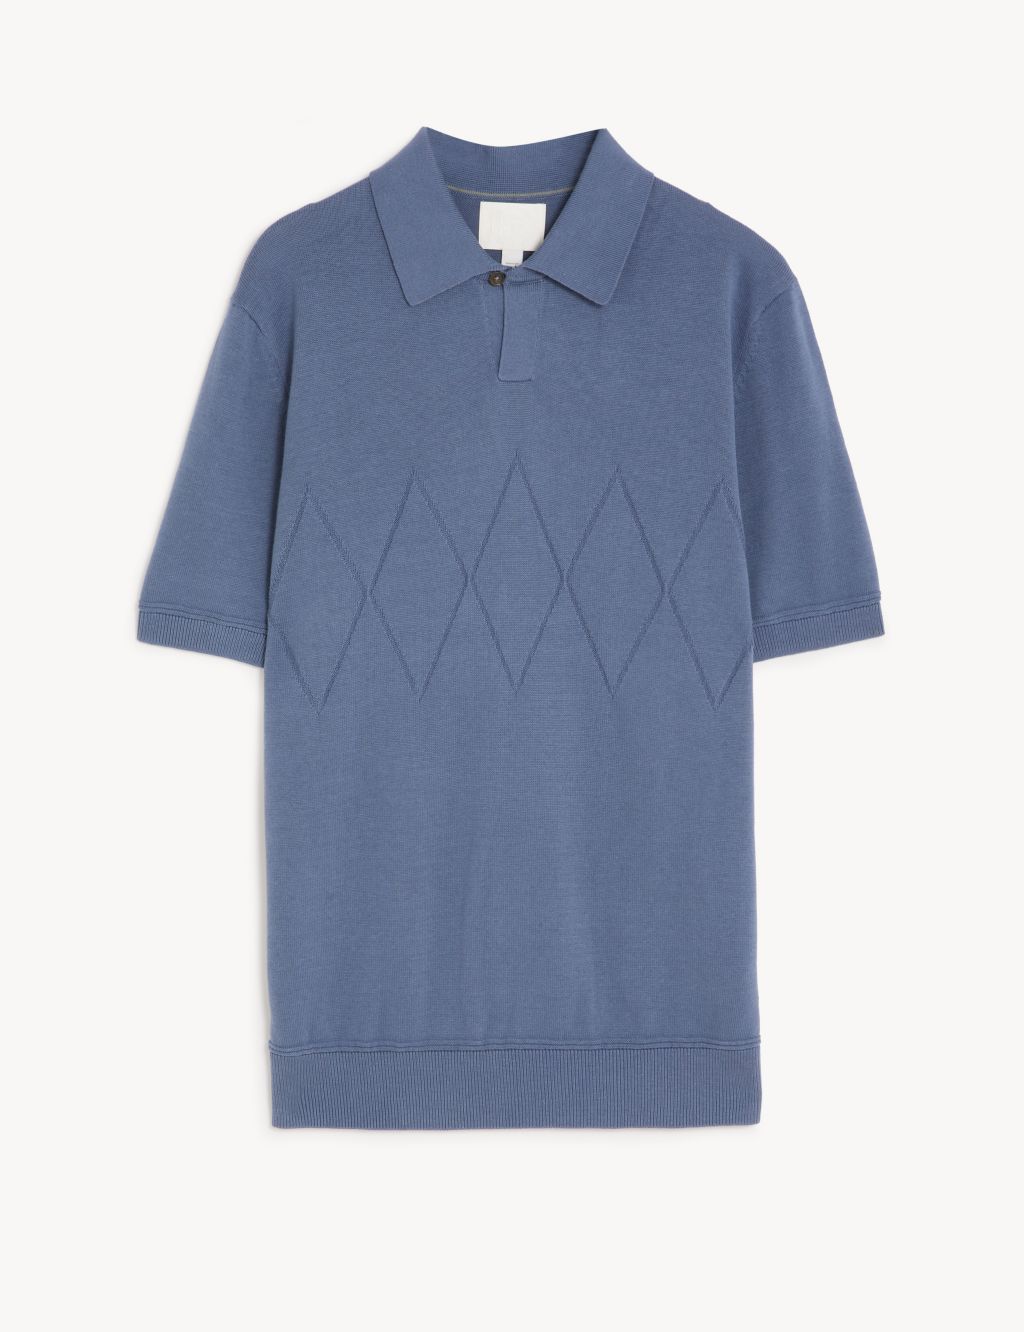 Lovell Pure Cotton Knitted Polo Shirt image 2